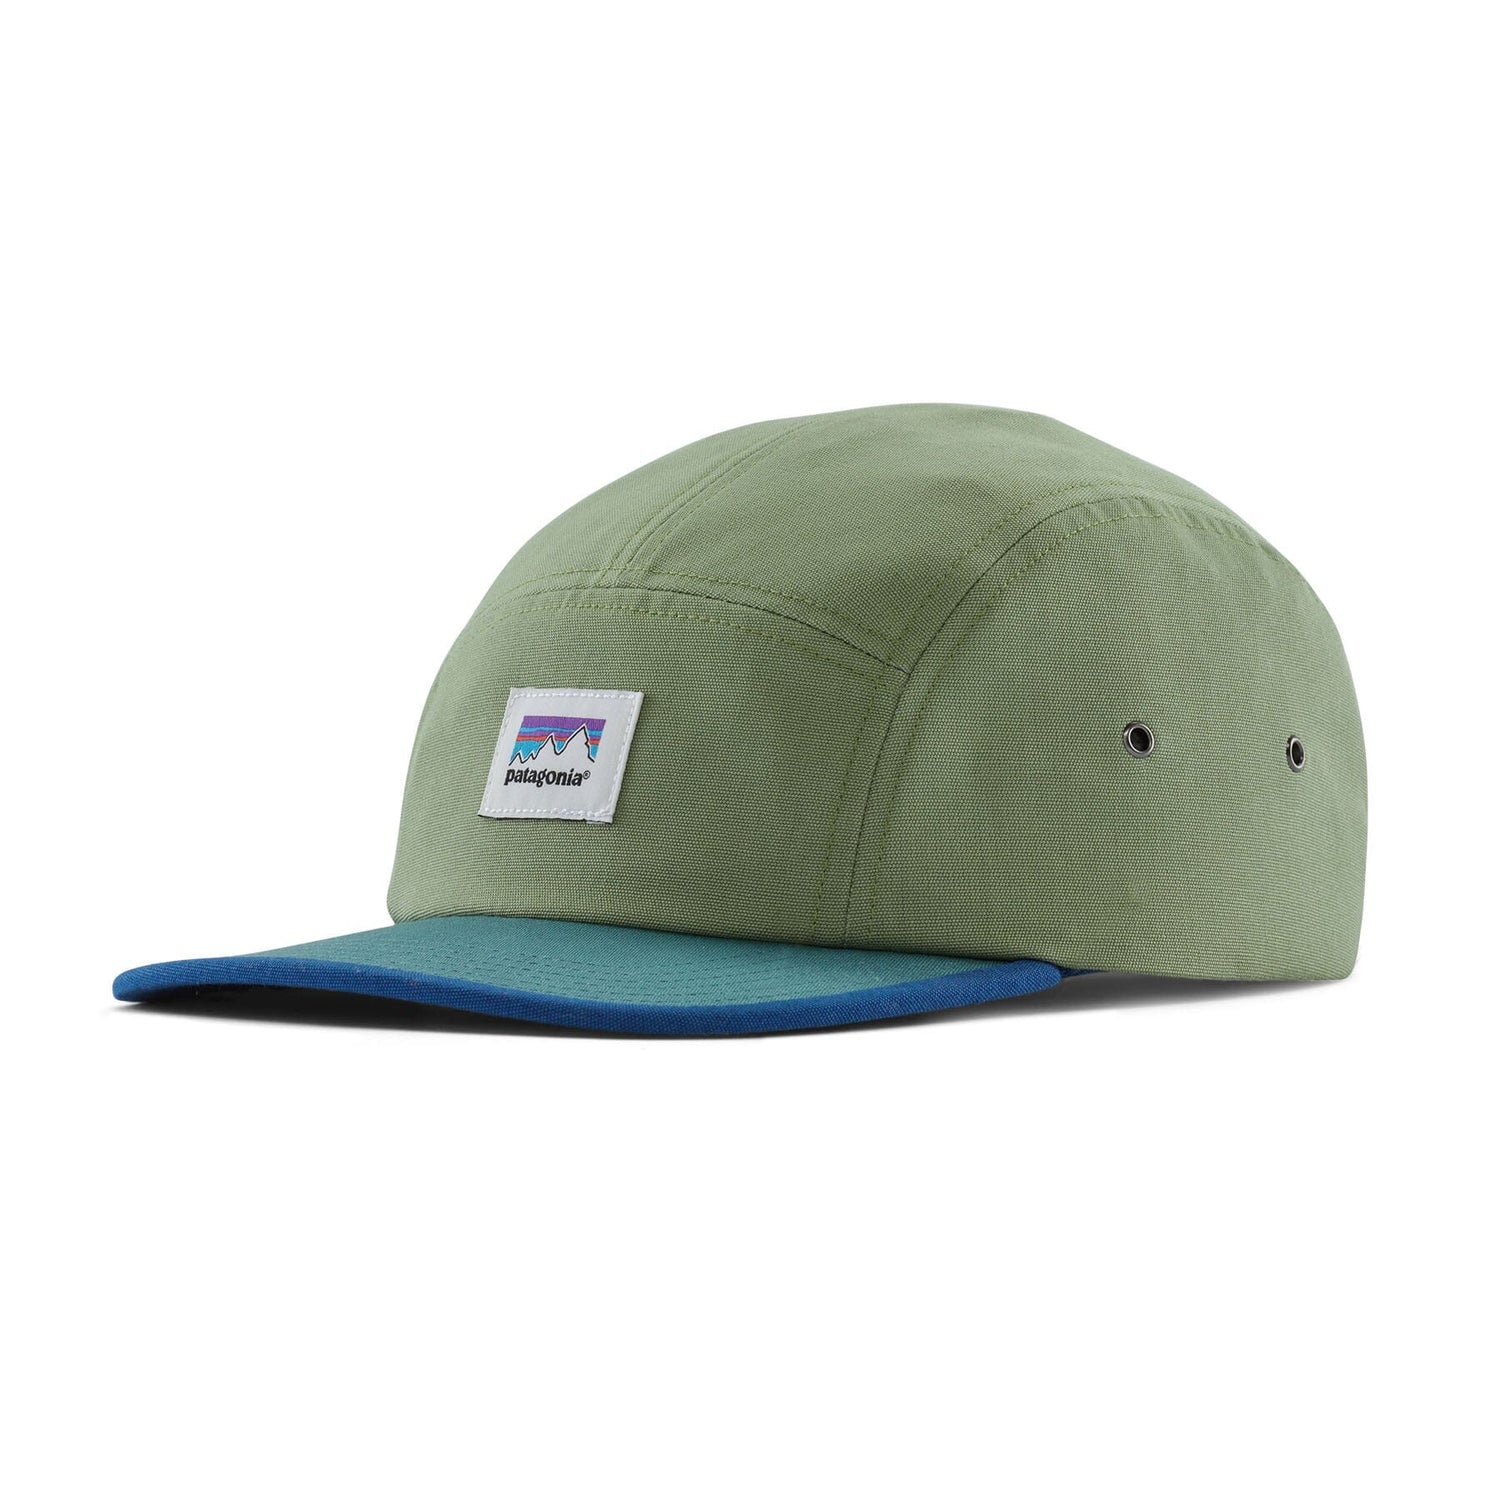 Patagonia - Graphic Maclure Hat - Organic Cotton & recycled polyester - Weekendbee - sustainable sportswear